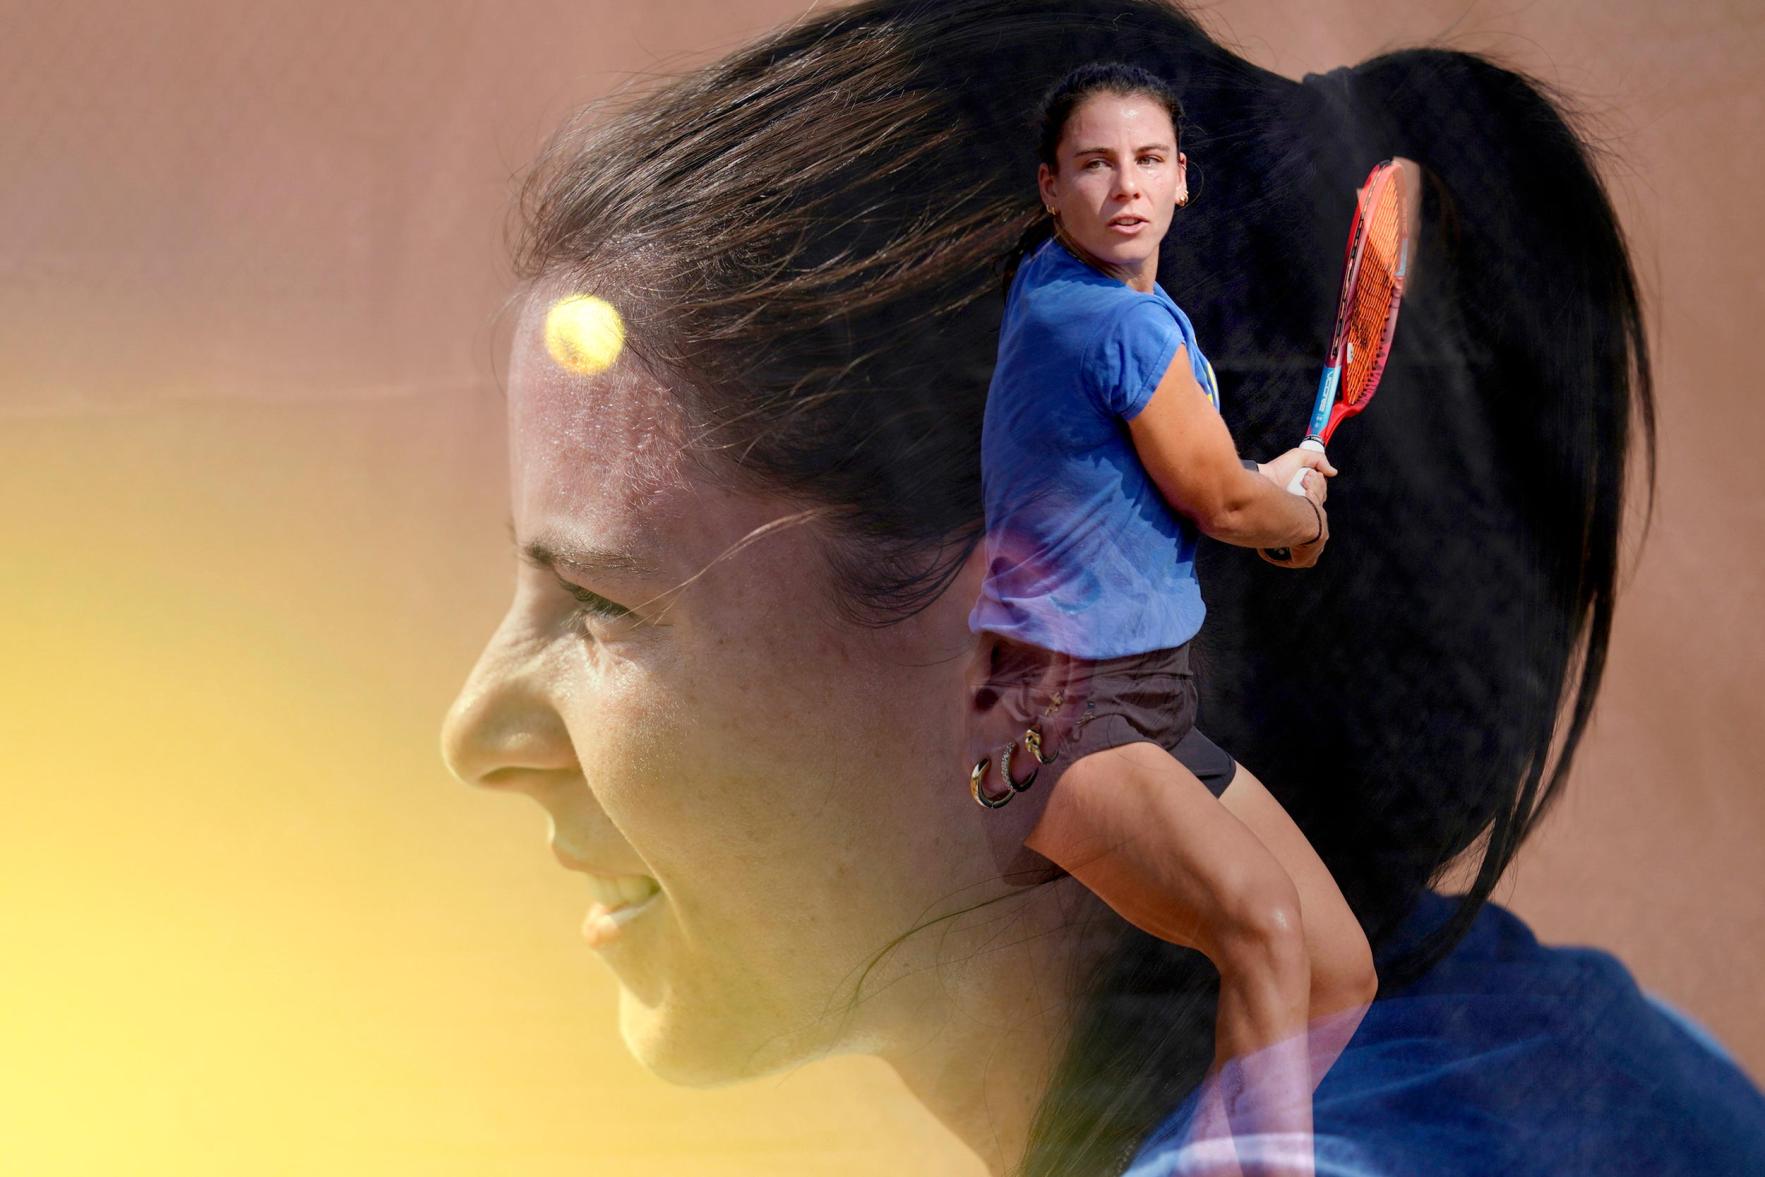 Poster featuring Emma Navarro playing tennis